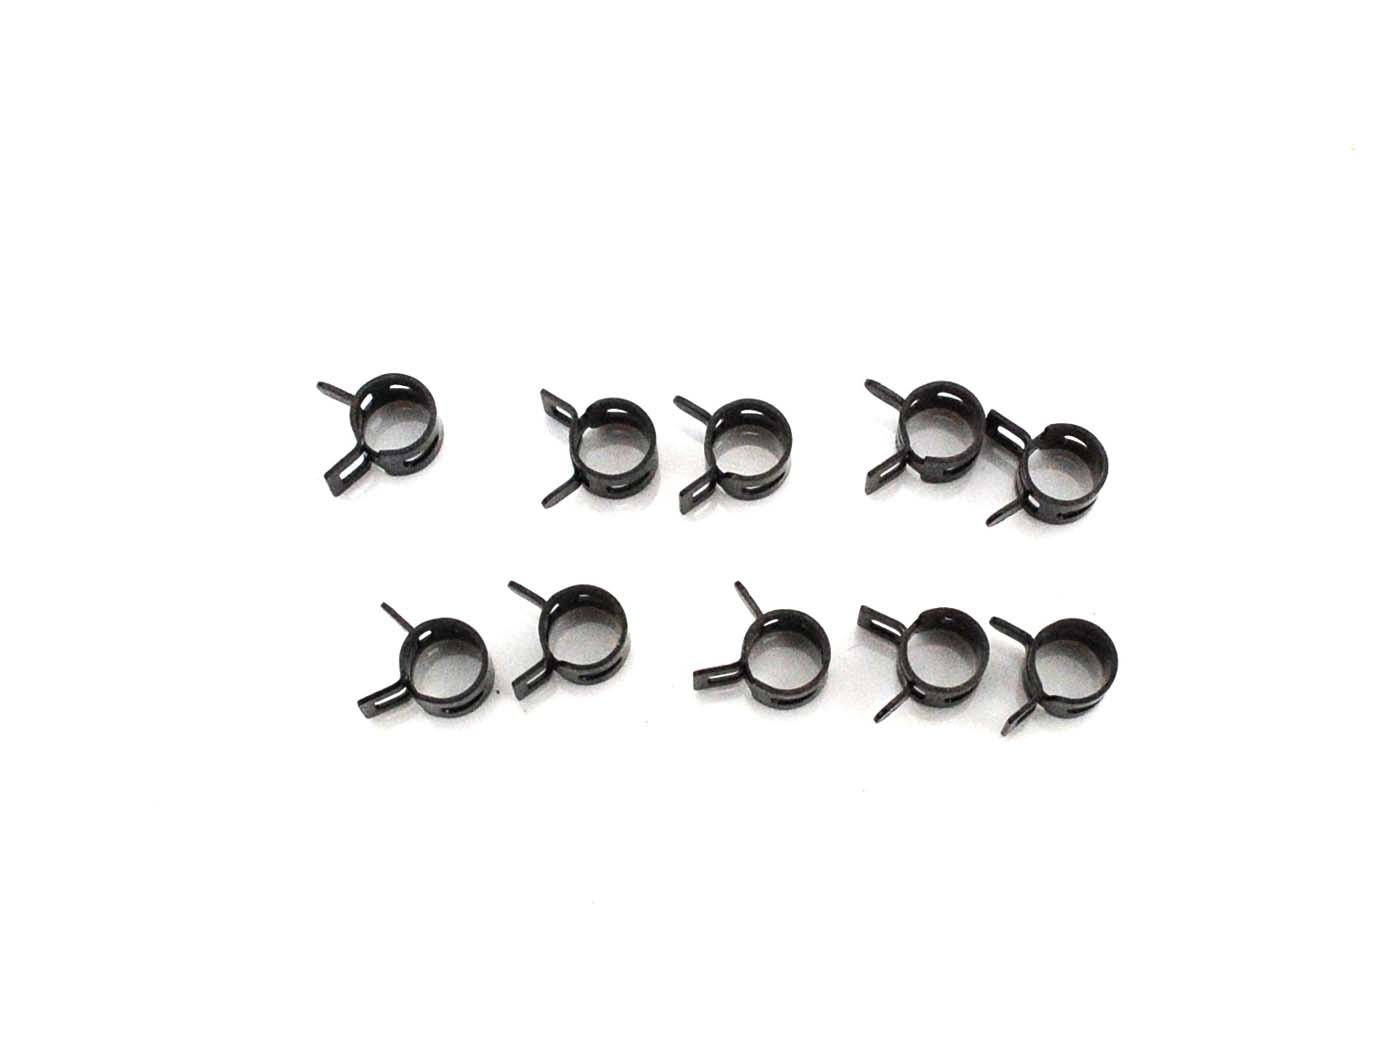 Fuel Hose Spring Clamp 10-pack 10mm For Moped Moped